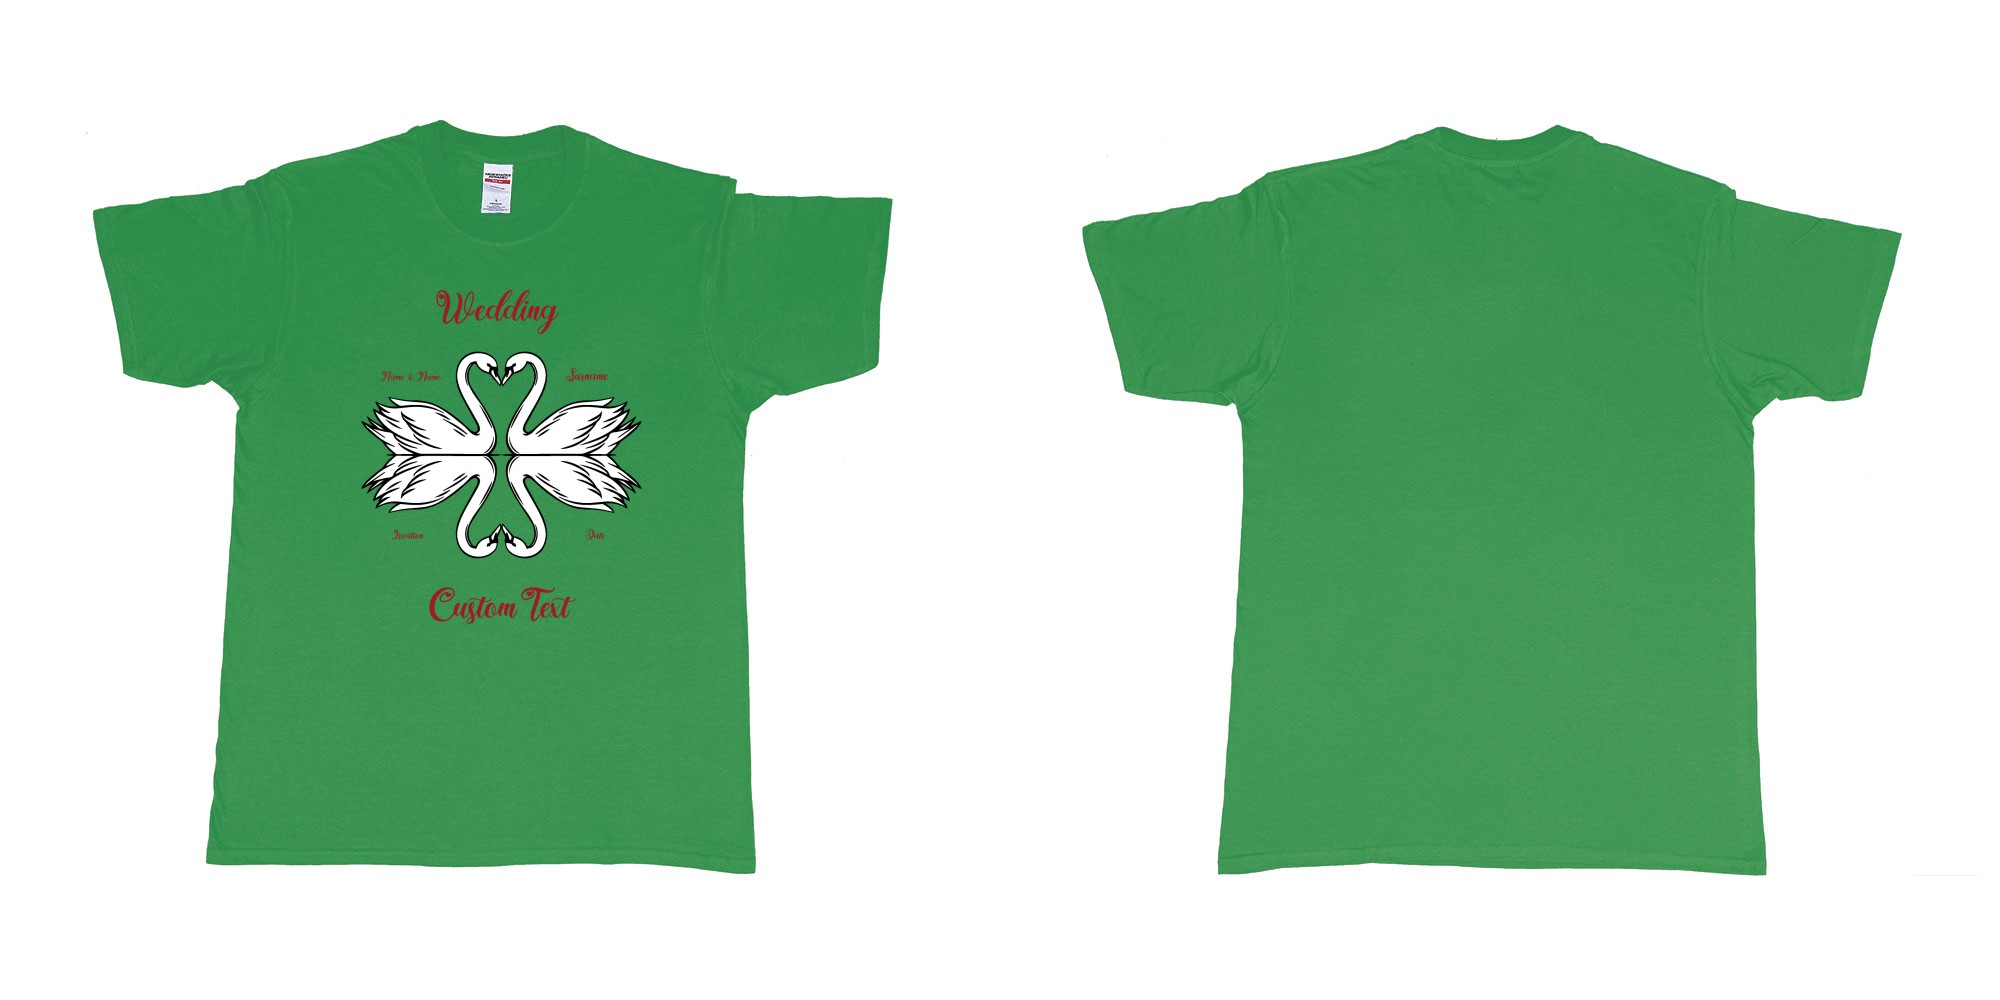 Custom tshirt design swans hearts reflection in fabric color irish-green choice your own text made in Bali by The Pirate Way